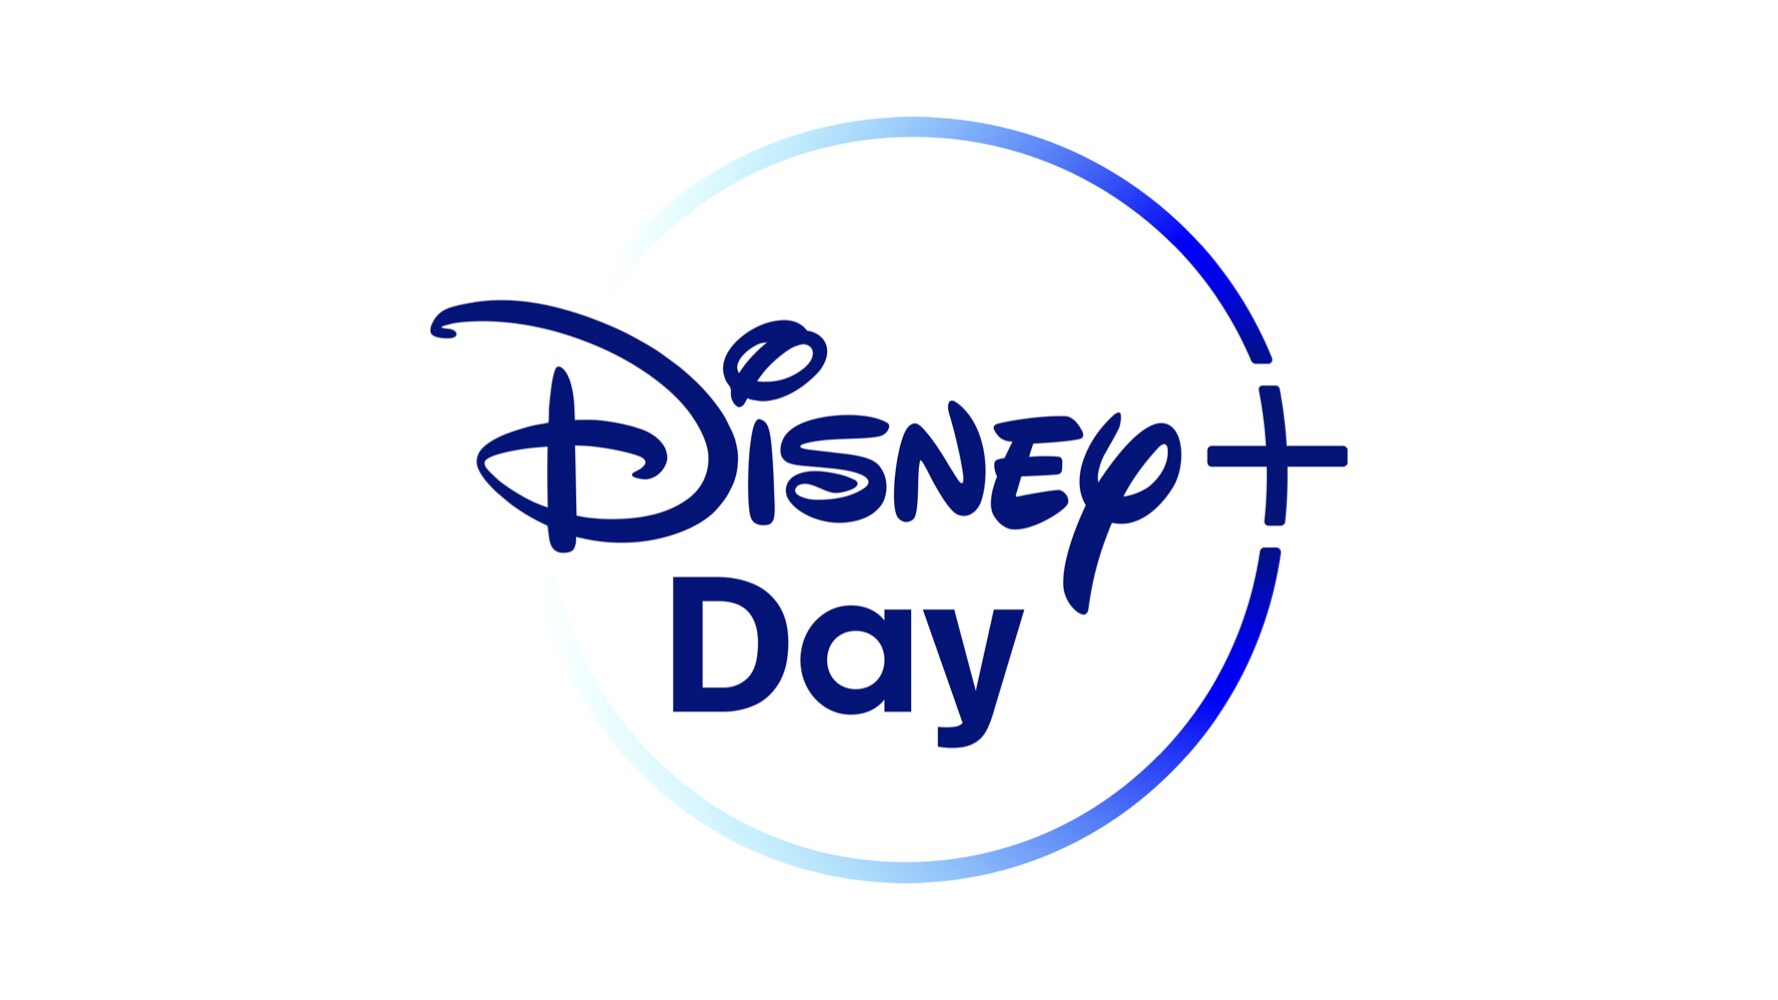 The Walt Disney Company Celebrates Disney+ Day On November 12 To Thank Subscribers With New Content, Fan Experiences, And More 